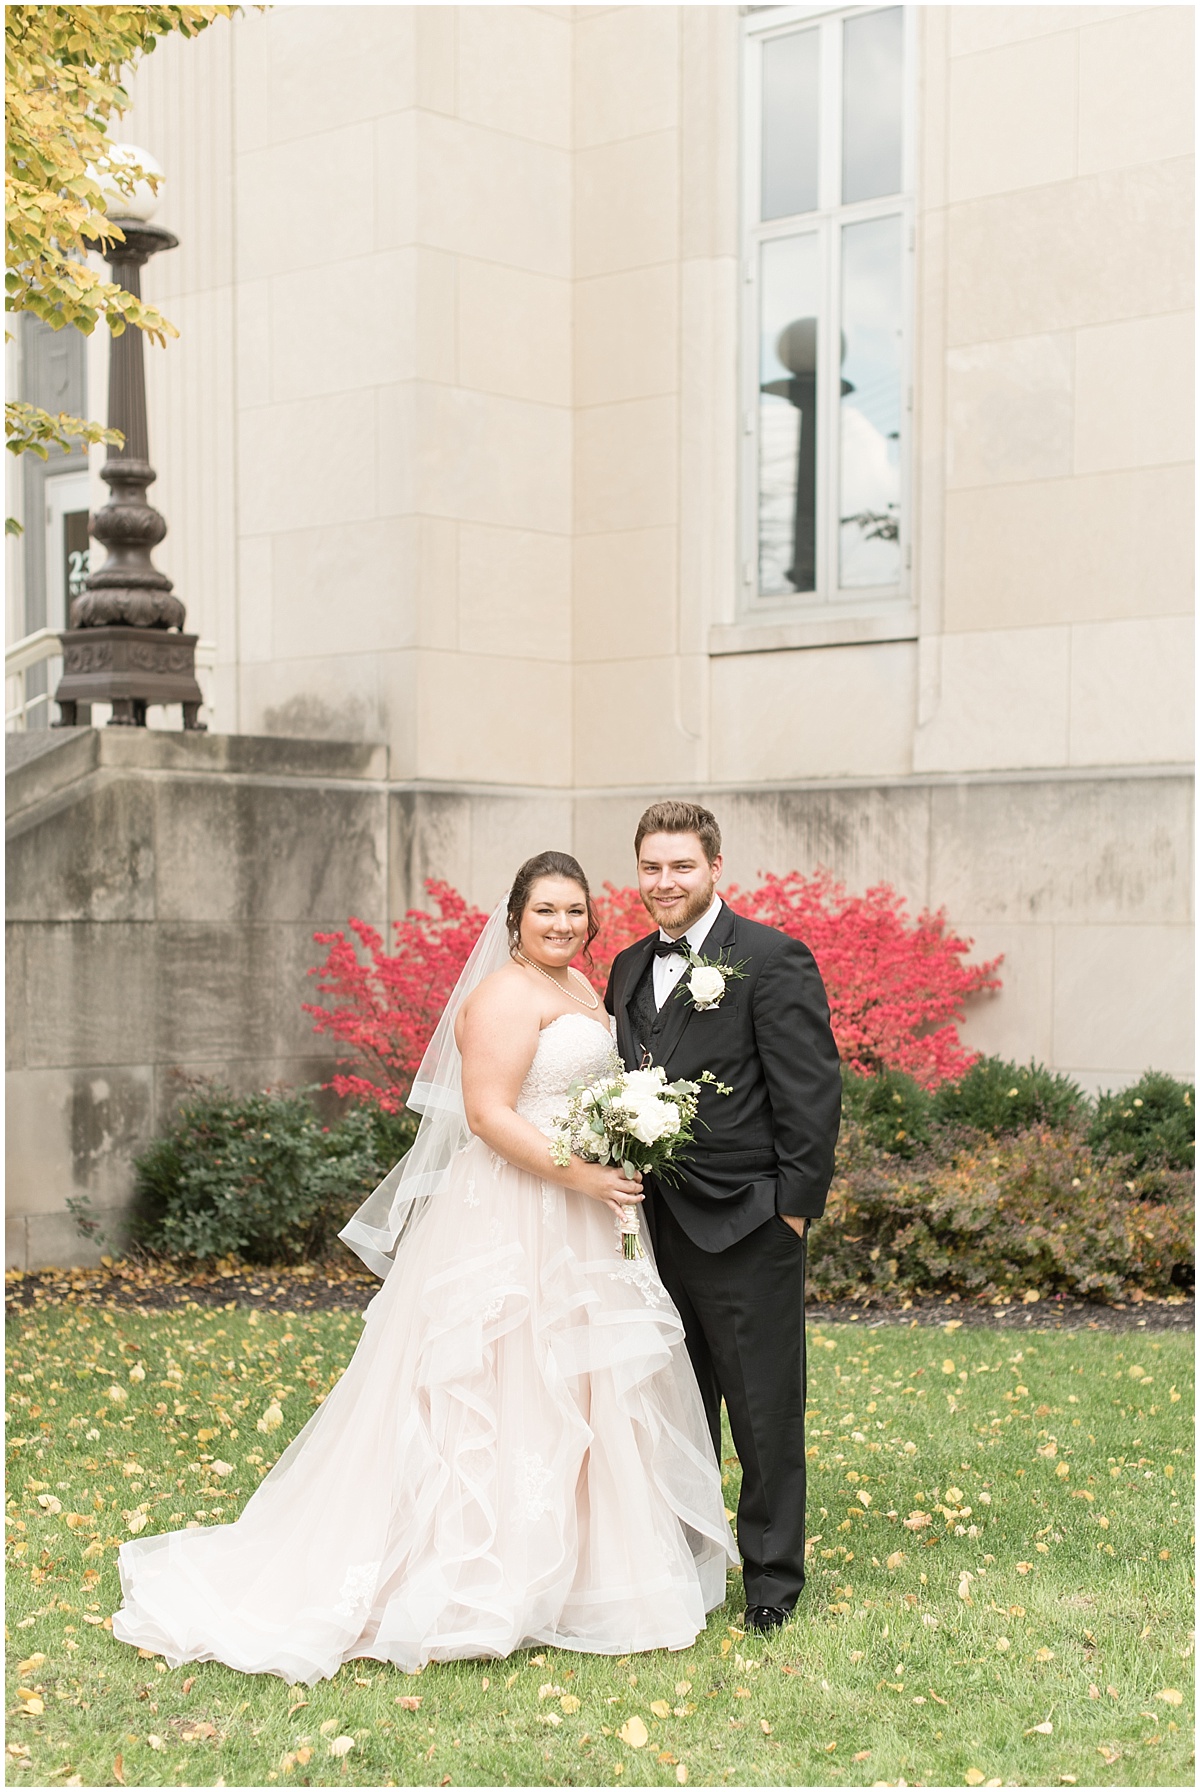 Chris and Ashley Peterson - Wedding at the Jasper County Fairgrounds in Rensselaer, Indiana94.jpg